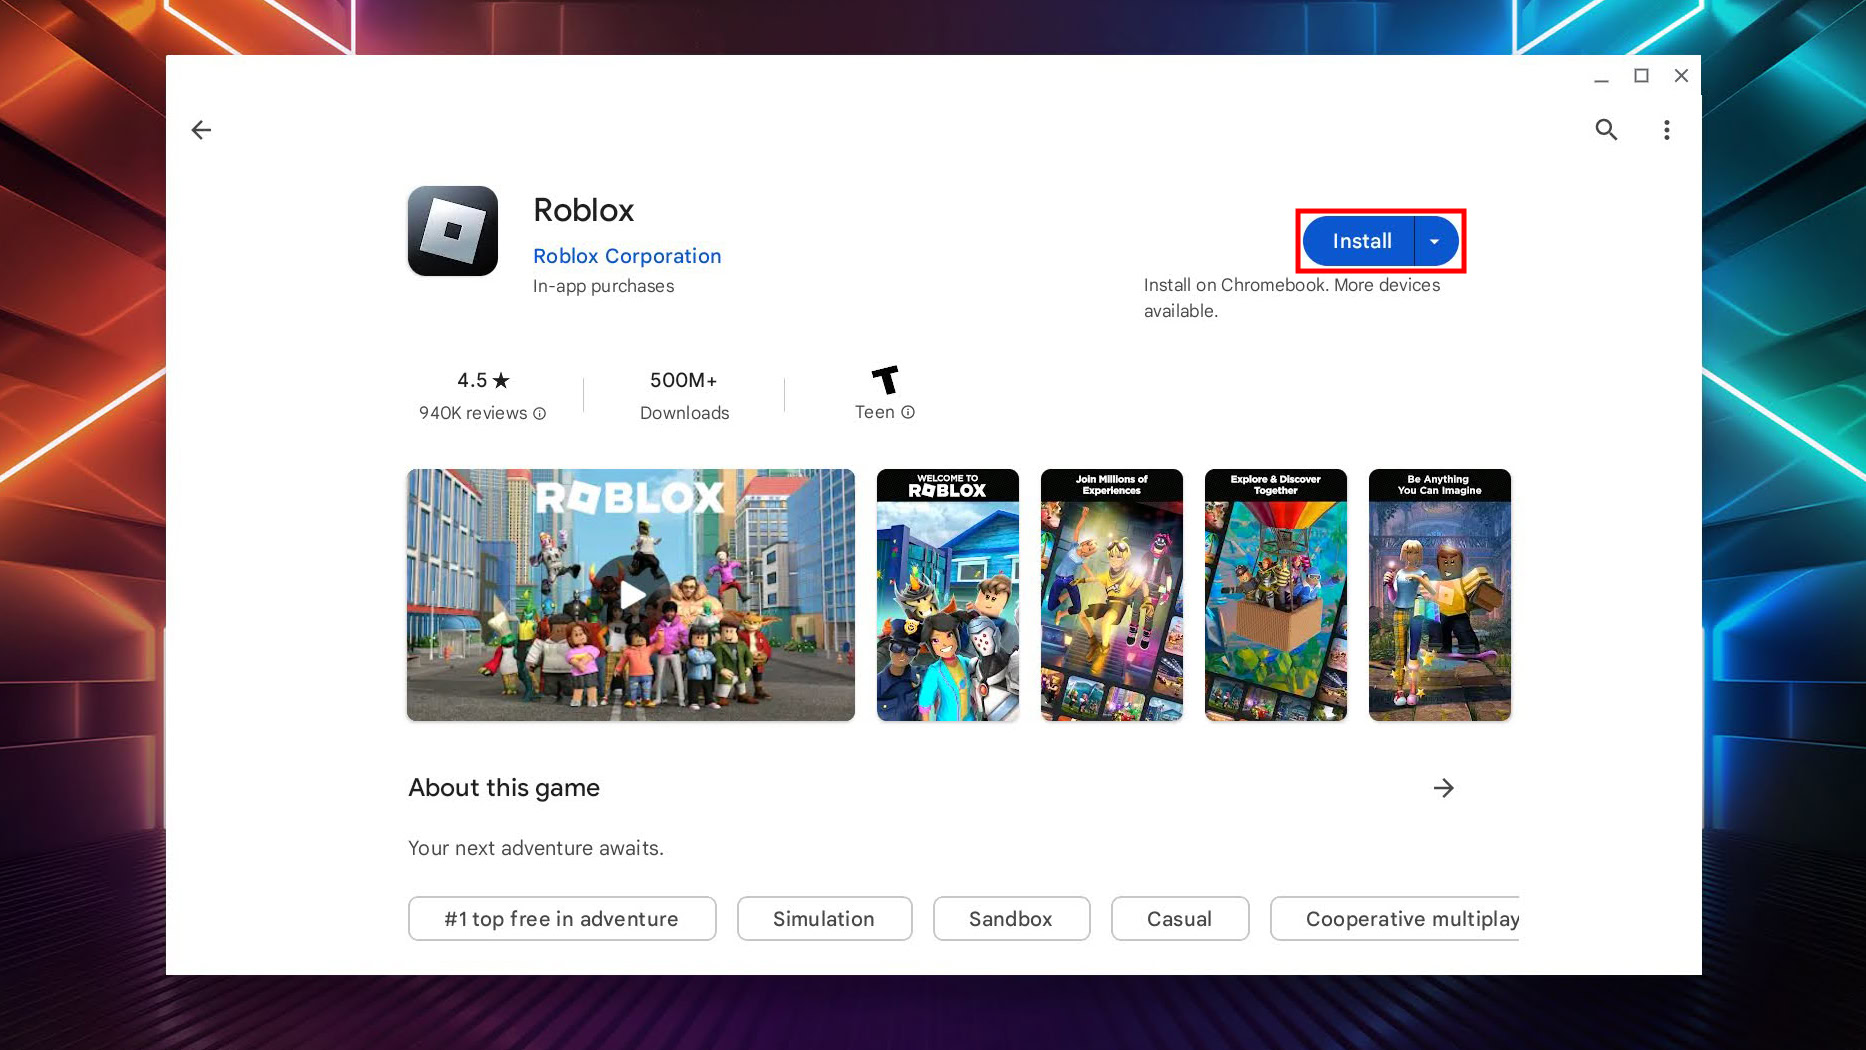 How to Install Roblox on Chromebook Without Google Play Store - 2022 